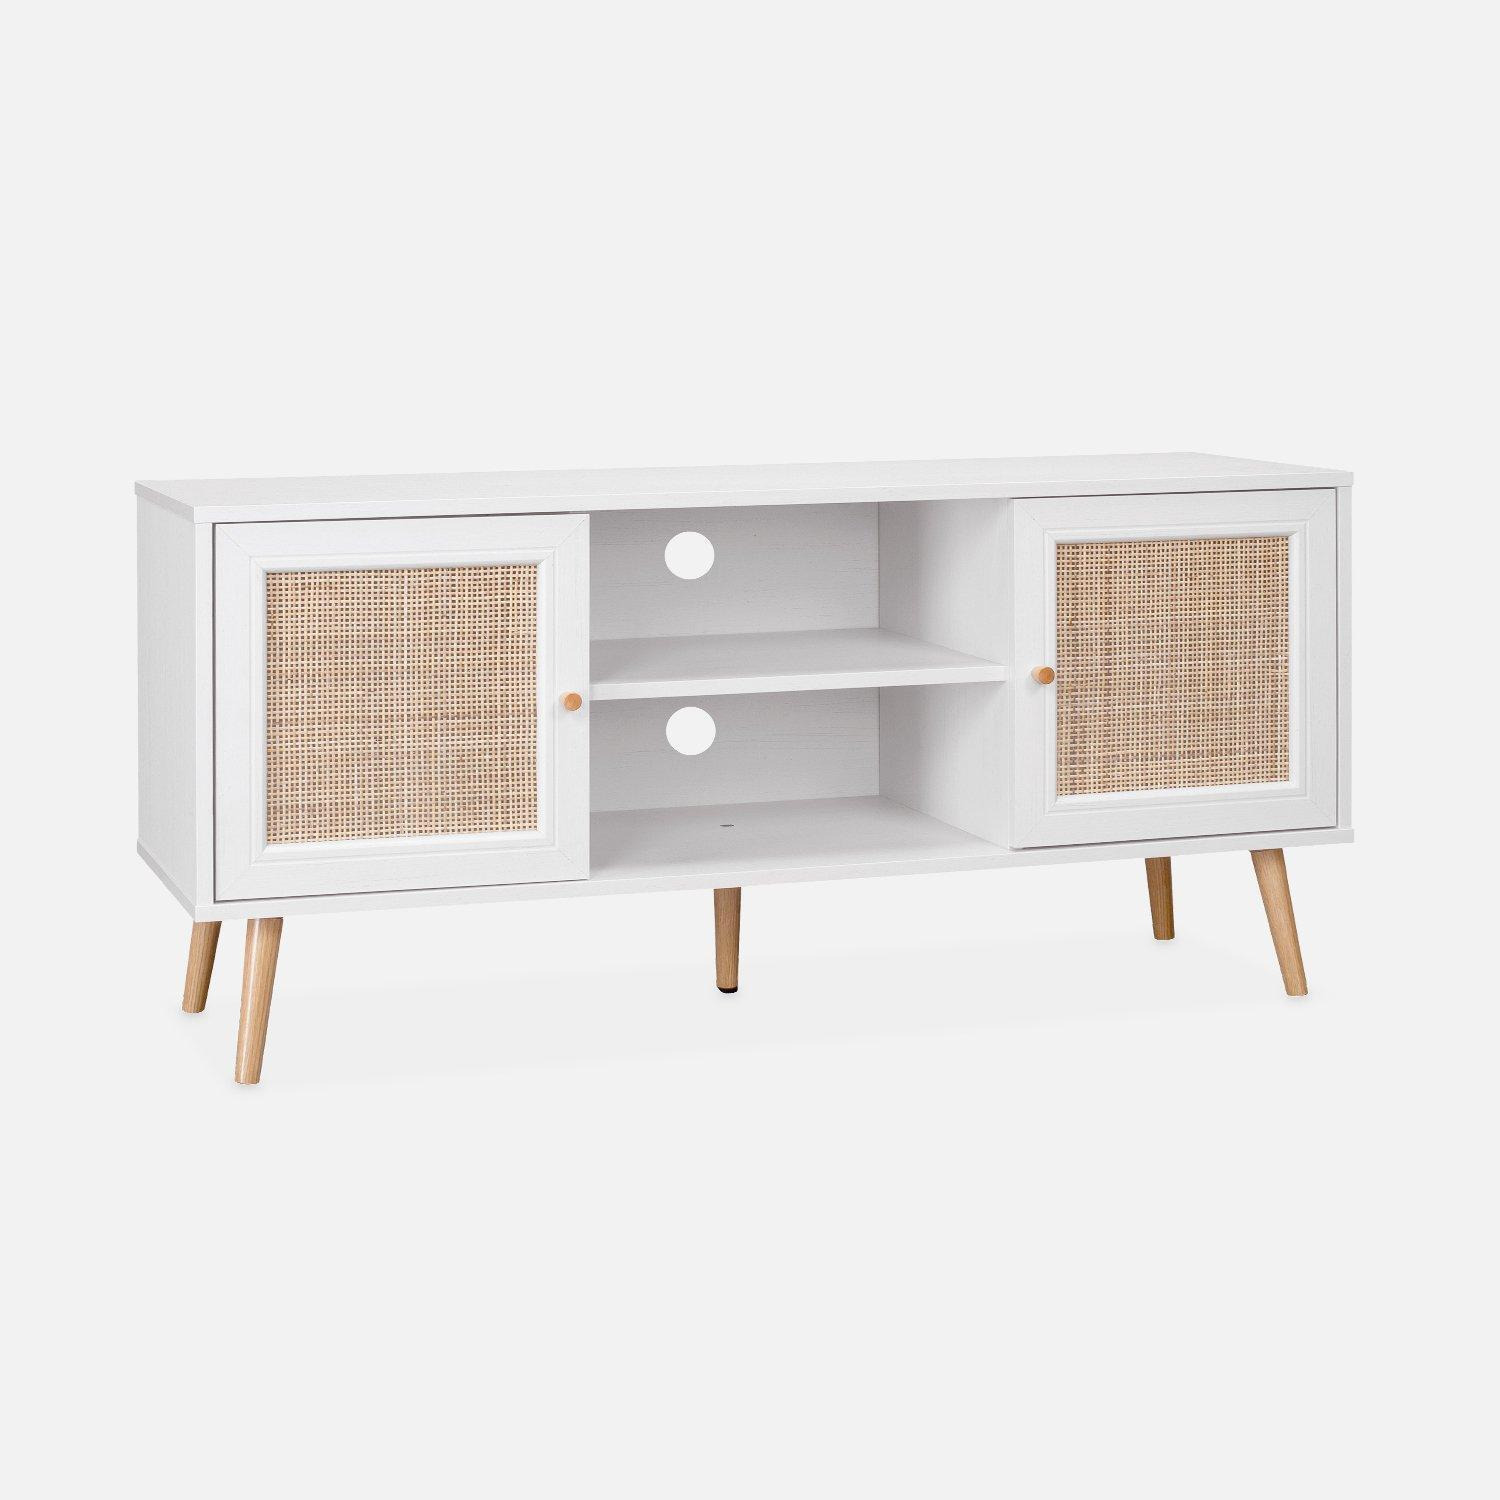 120cm Scandi-style Wood And Cane Rattan Tv Stand - image 1